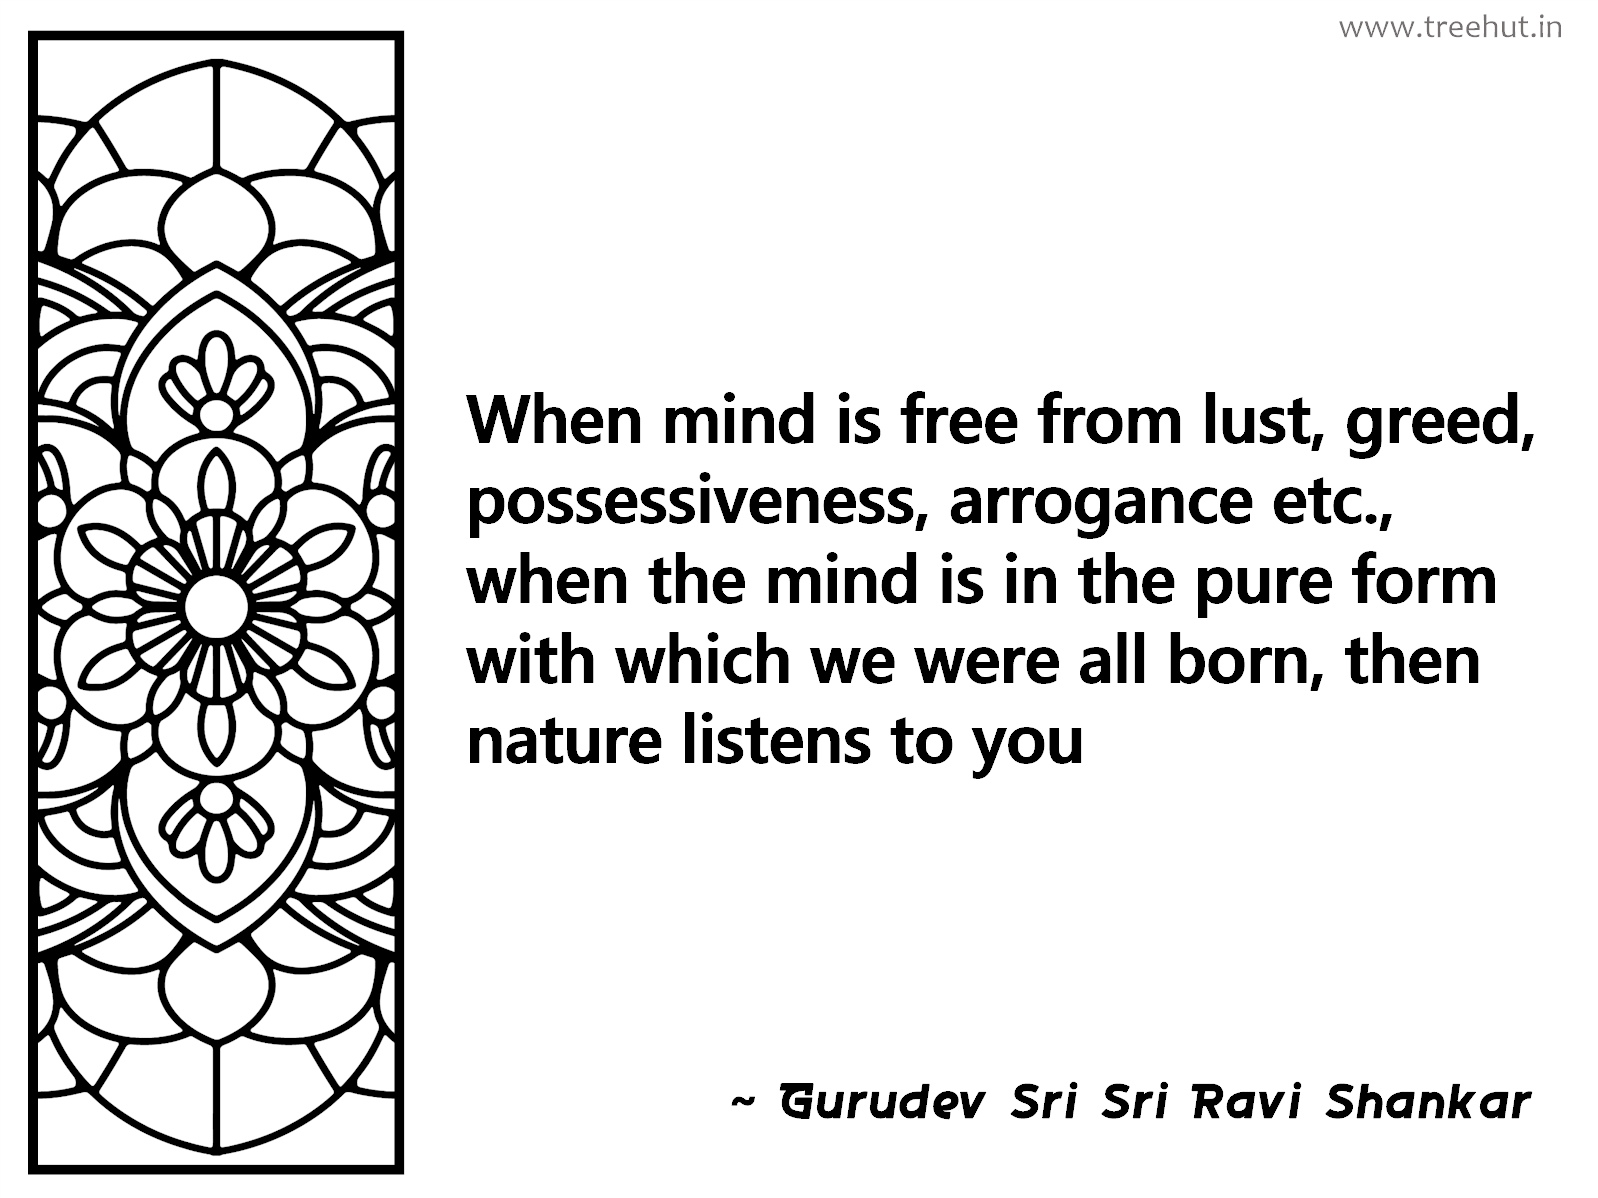 When mind is free from lust, greed, possessiveness, arrogance etc., when the mind is in the pure form with which we were all born, then nature listens to you Inspirational Quote by Gurudev Sri Sri Ravi Shankar, coloring pages